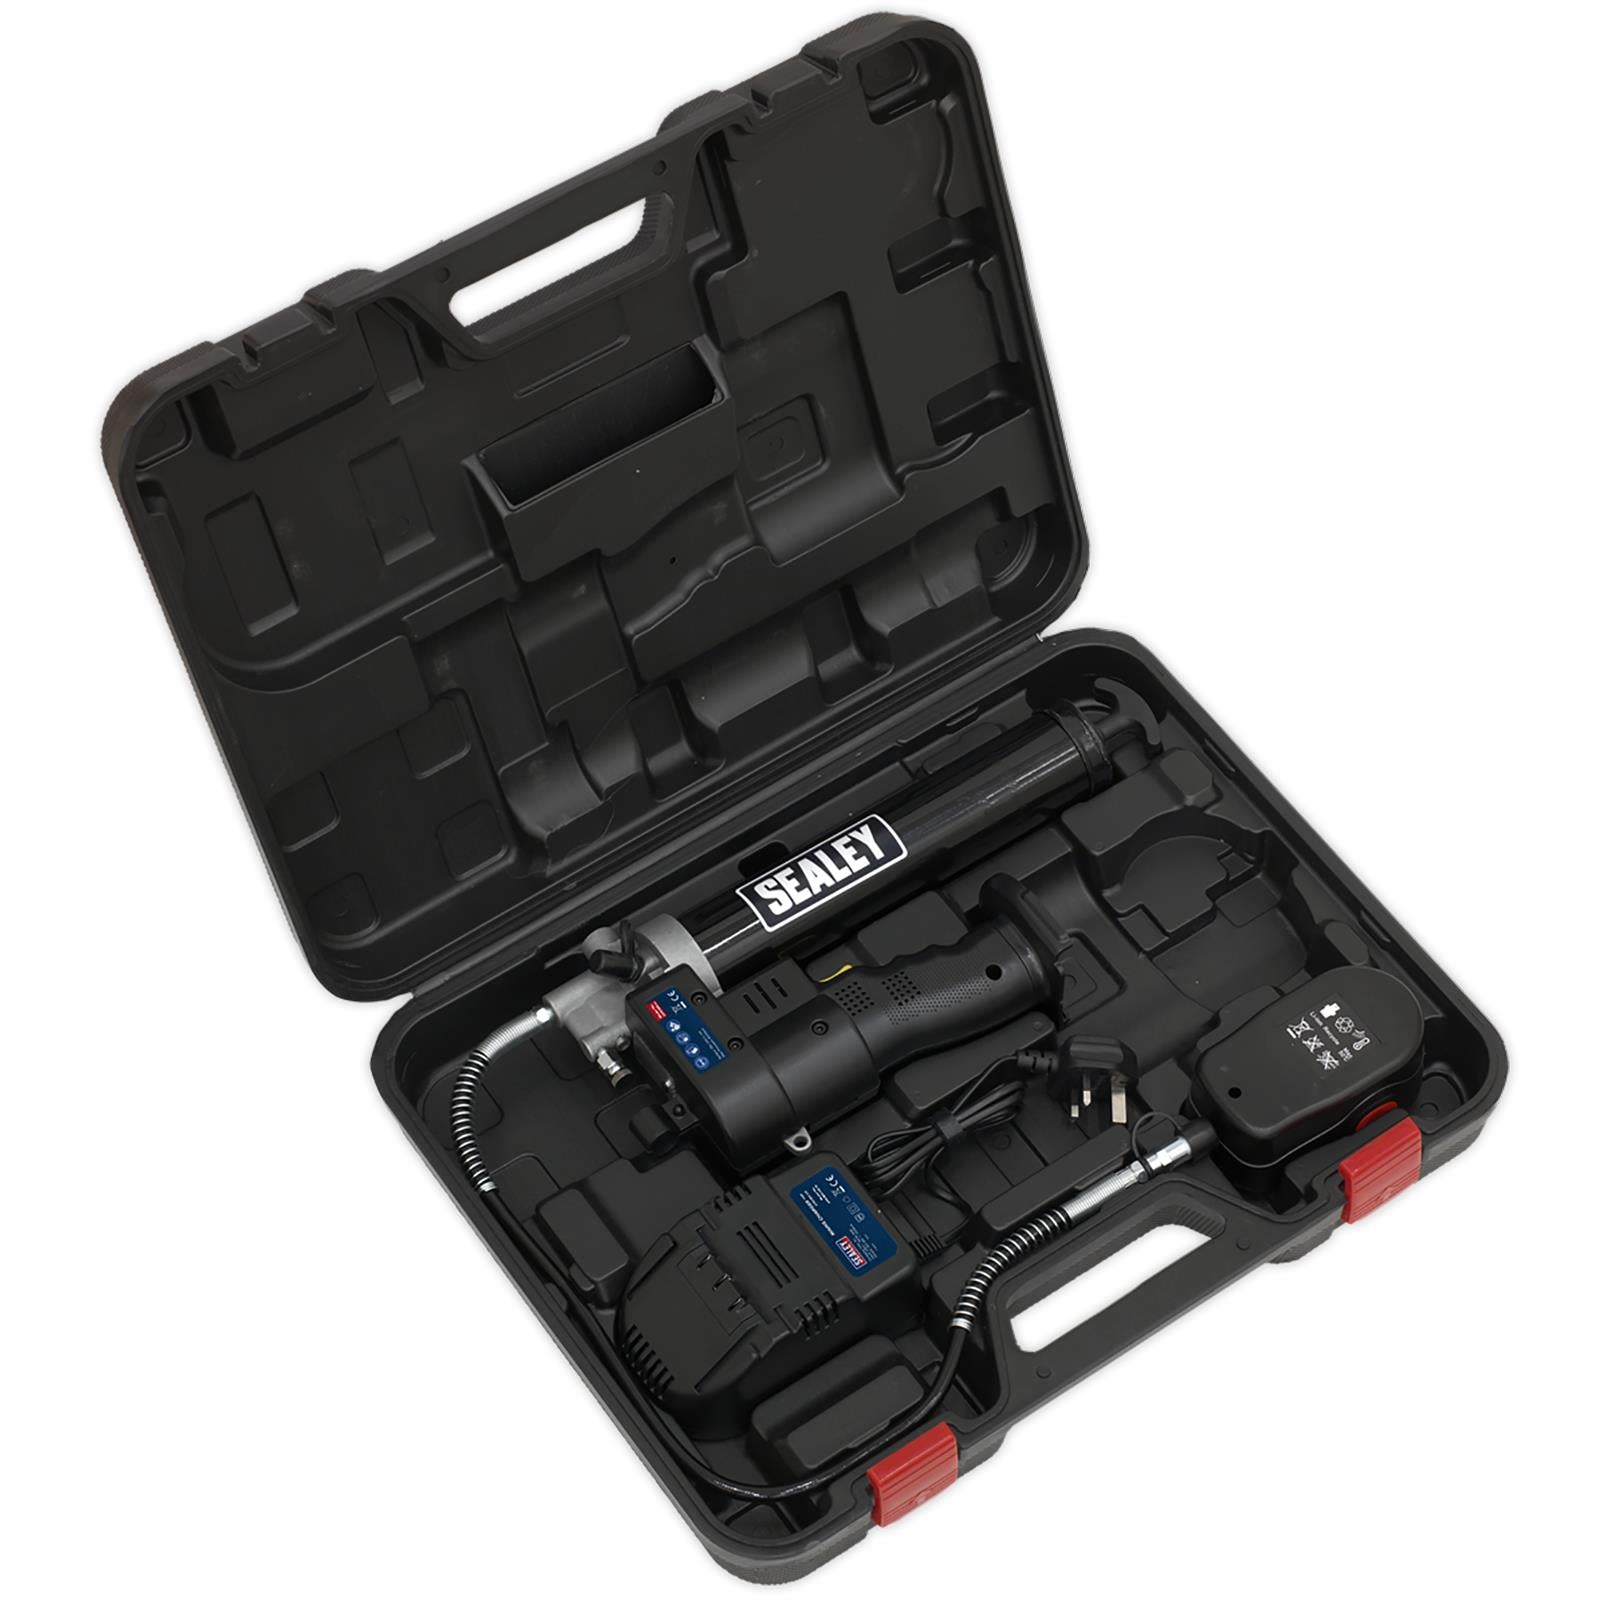 Sealey 18V Cordless Grease Gun 1.7Ah Battery and Mains Charger in Carry Case